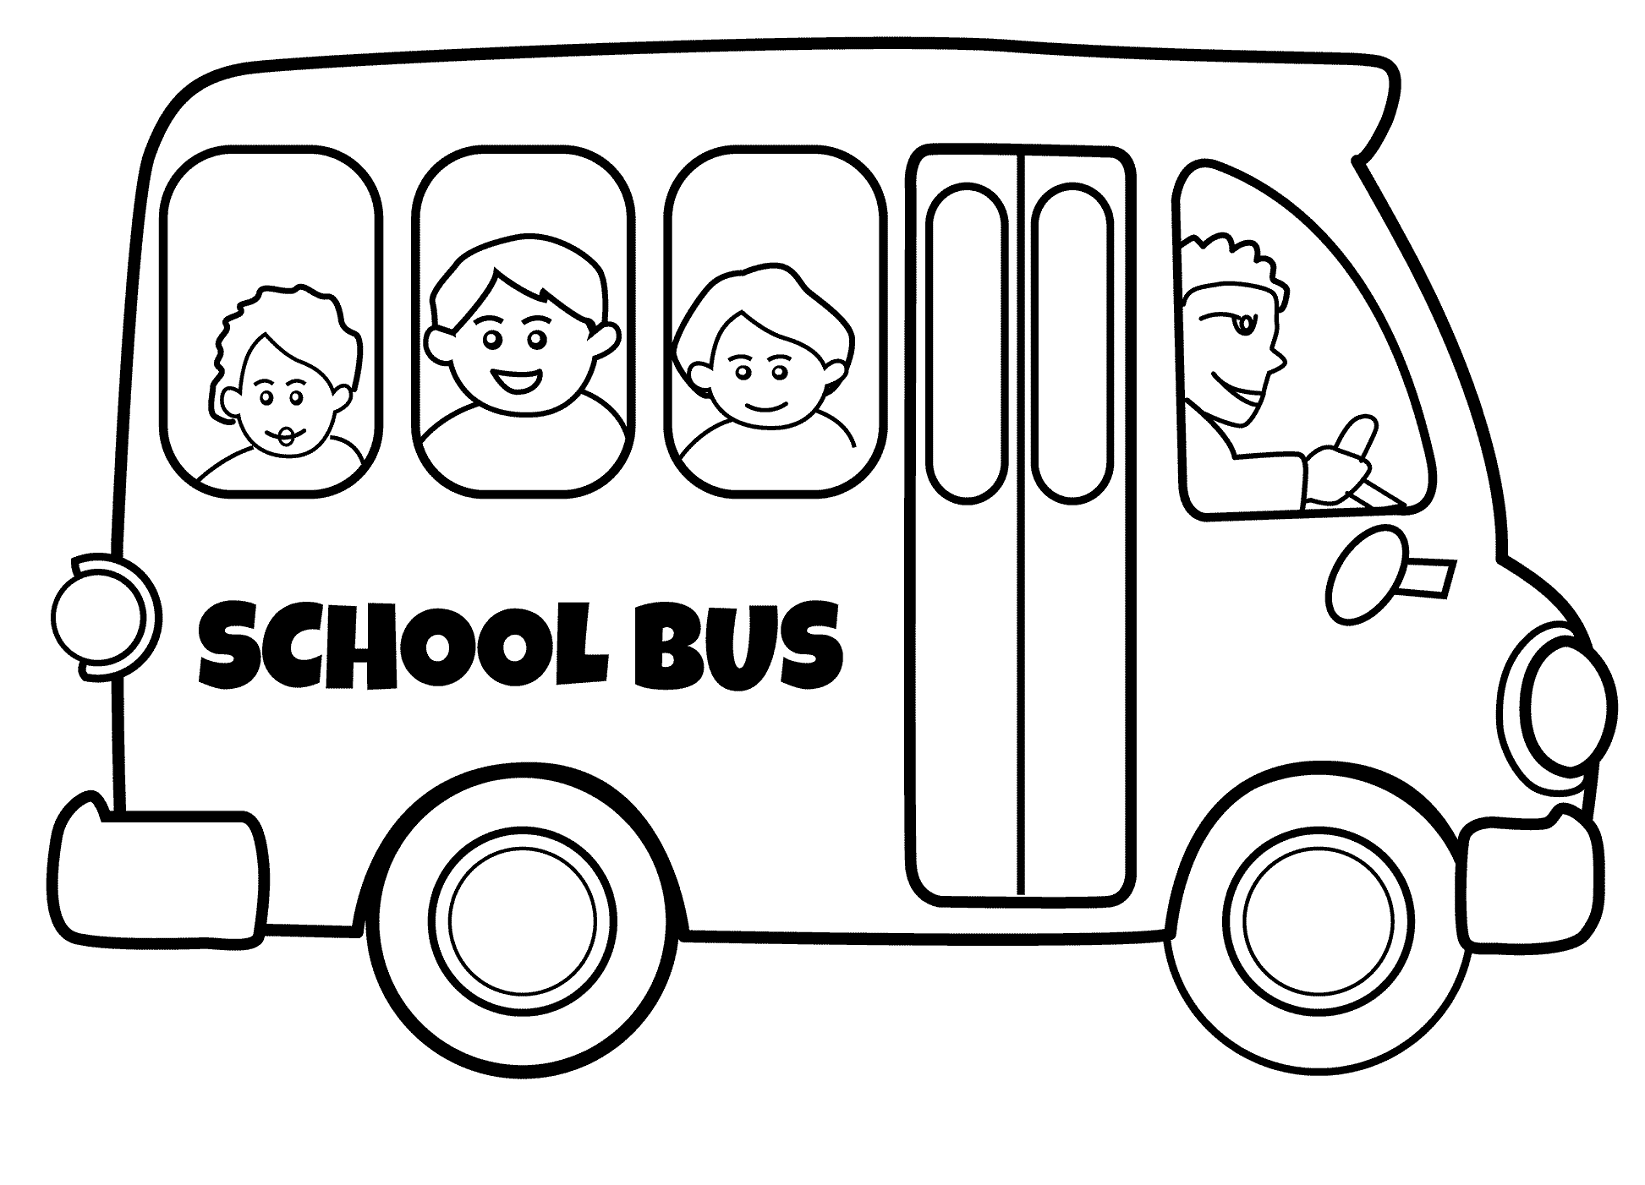 School bus Transportation Coloring Pages